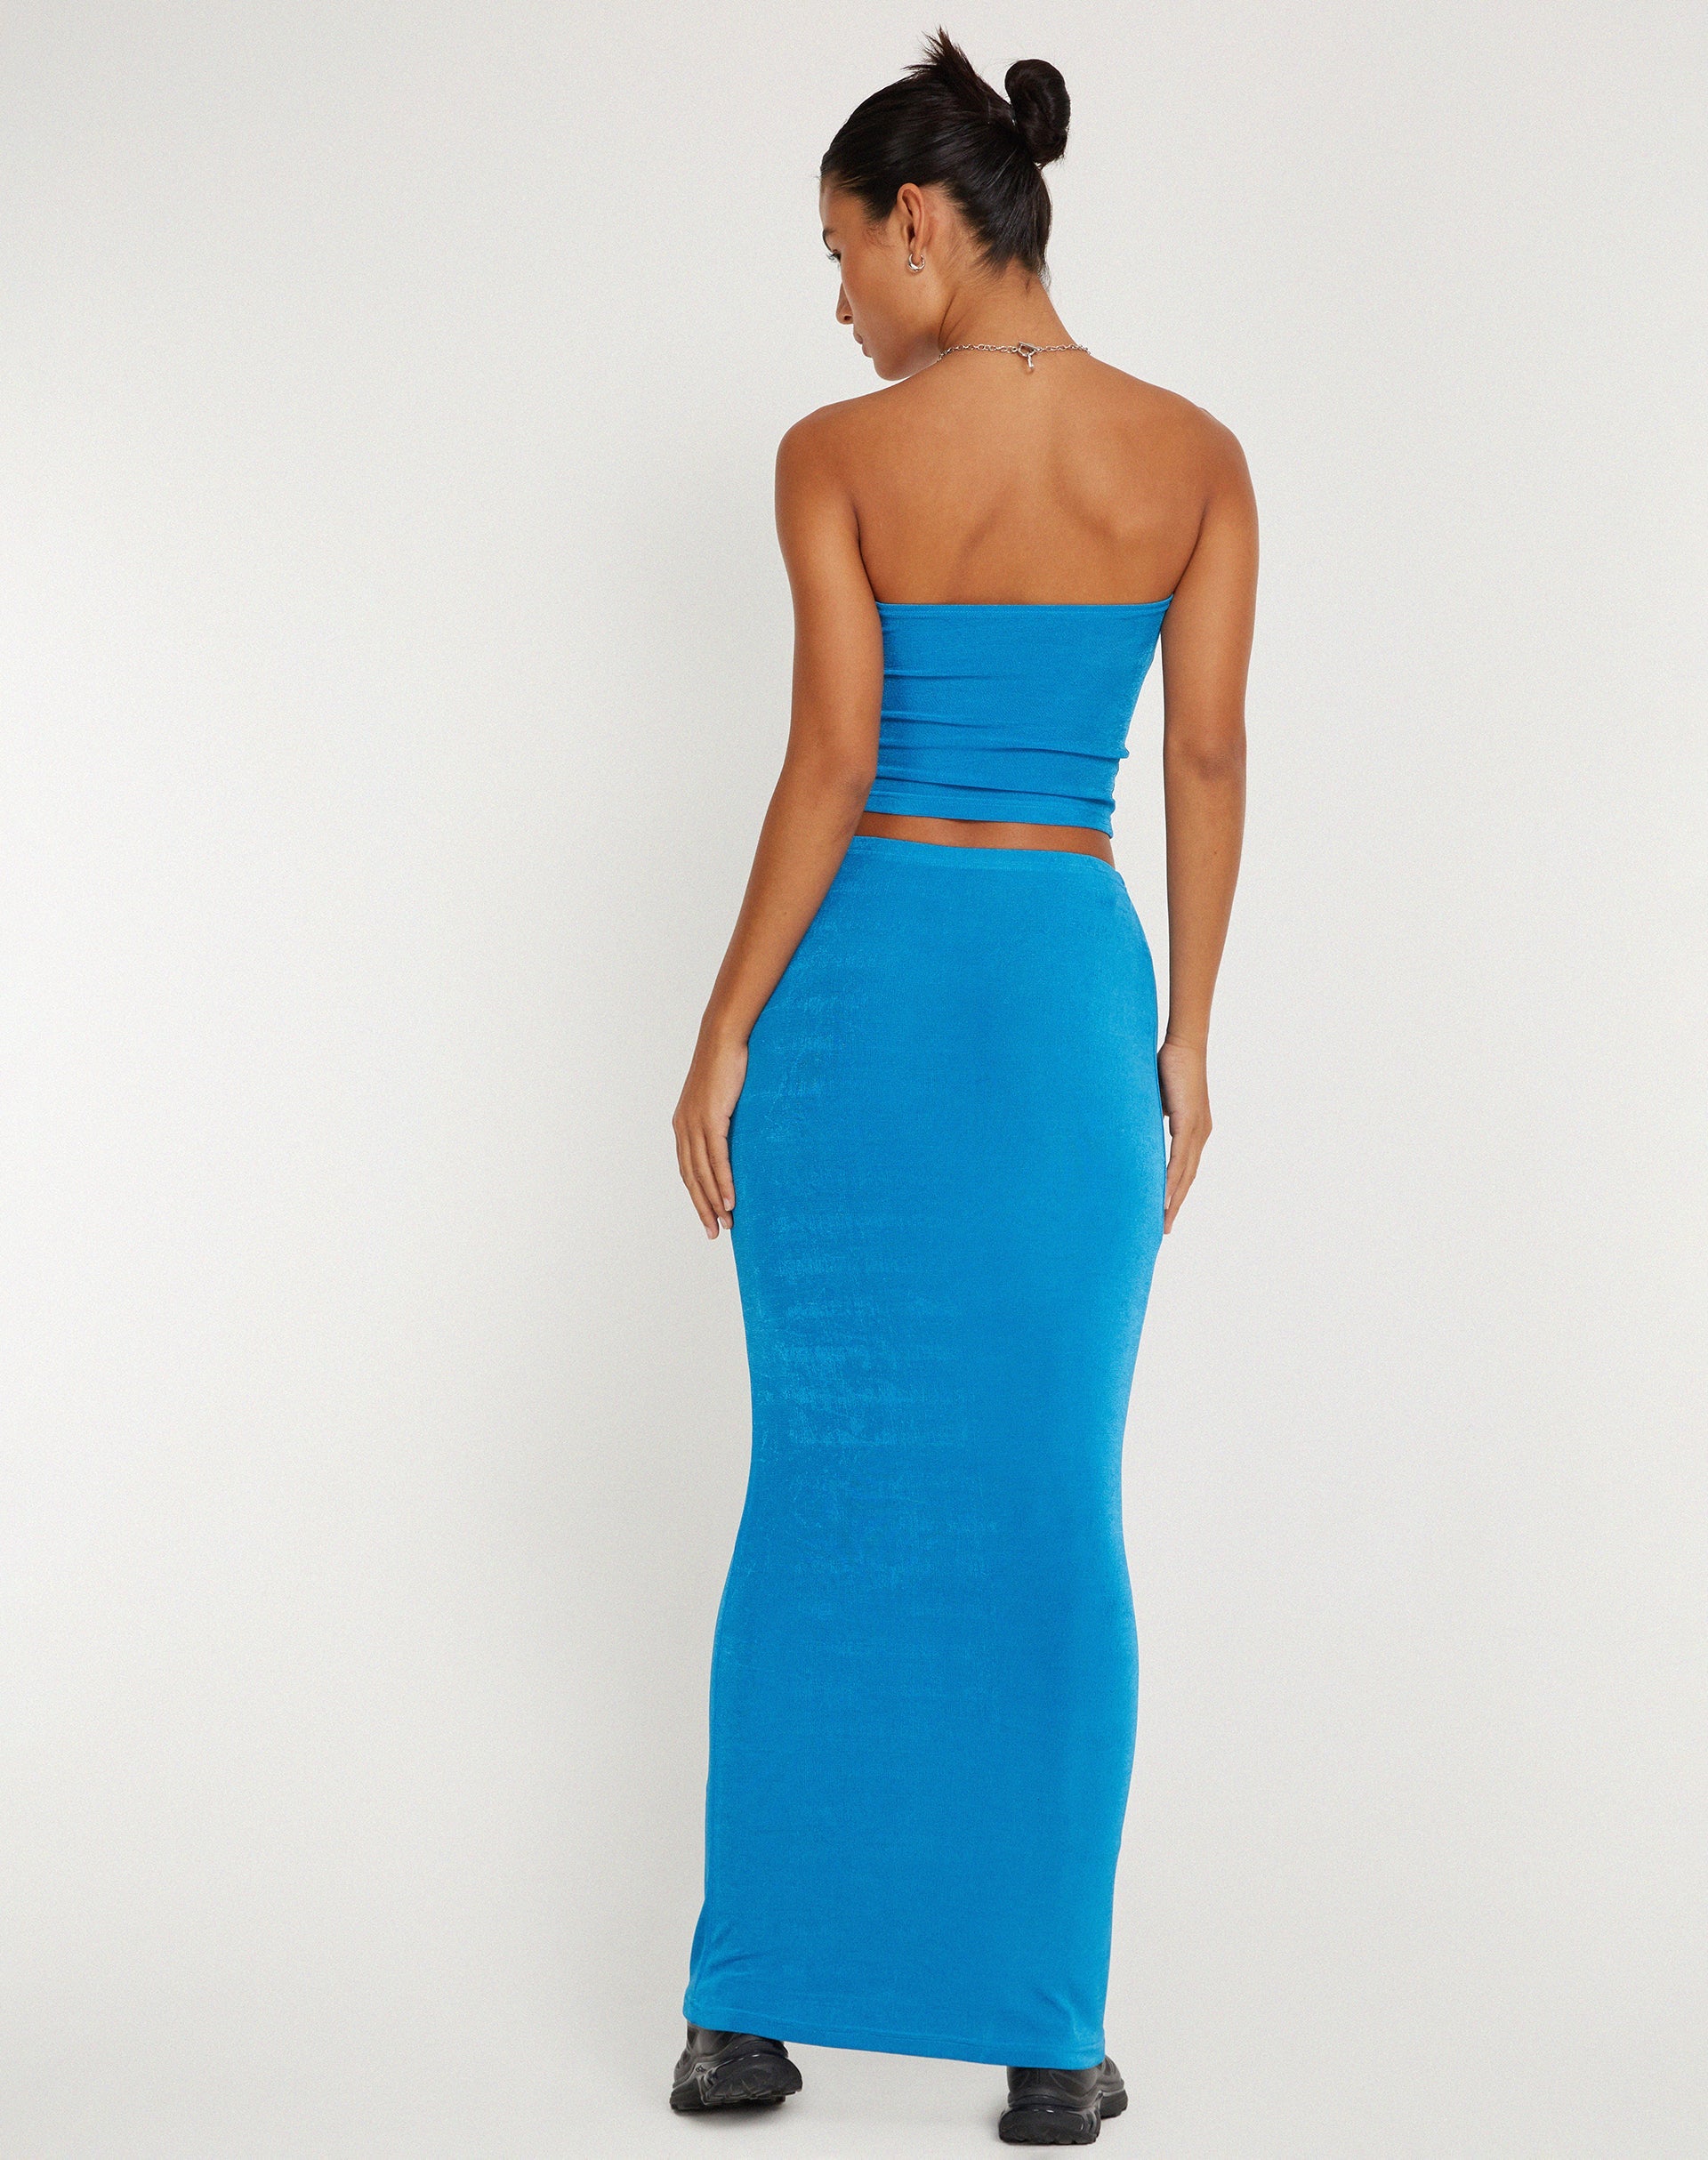 IMAGE OF Tulus Maxi Skirt in Electric Blue